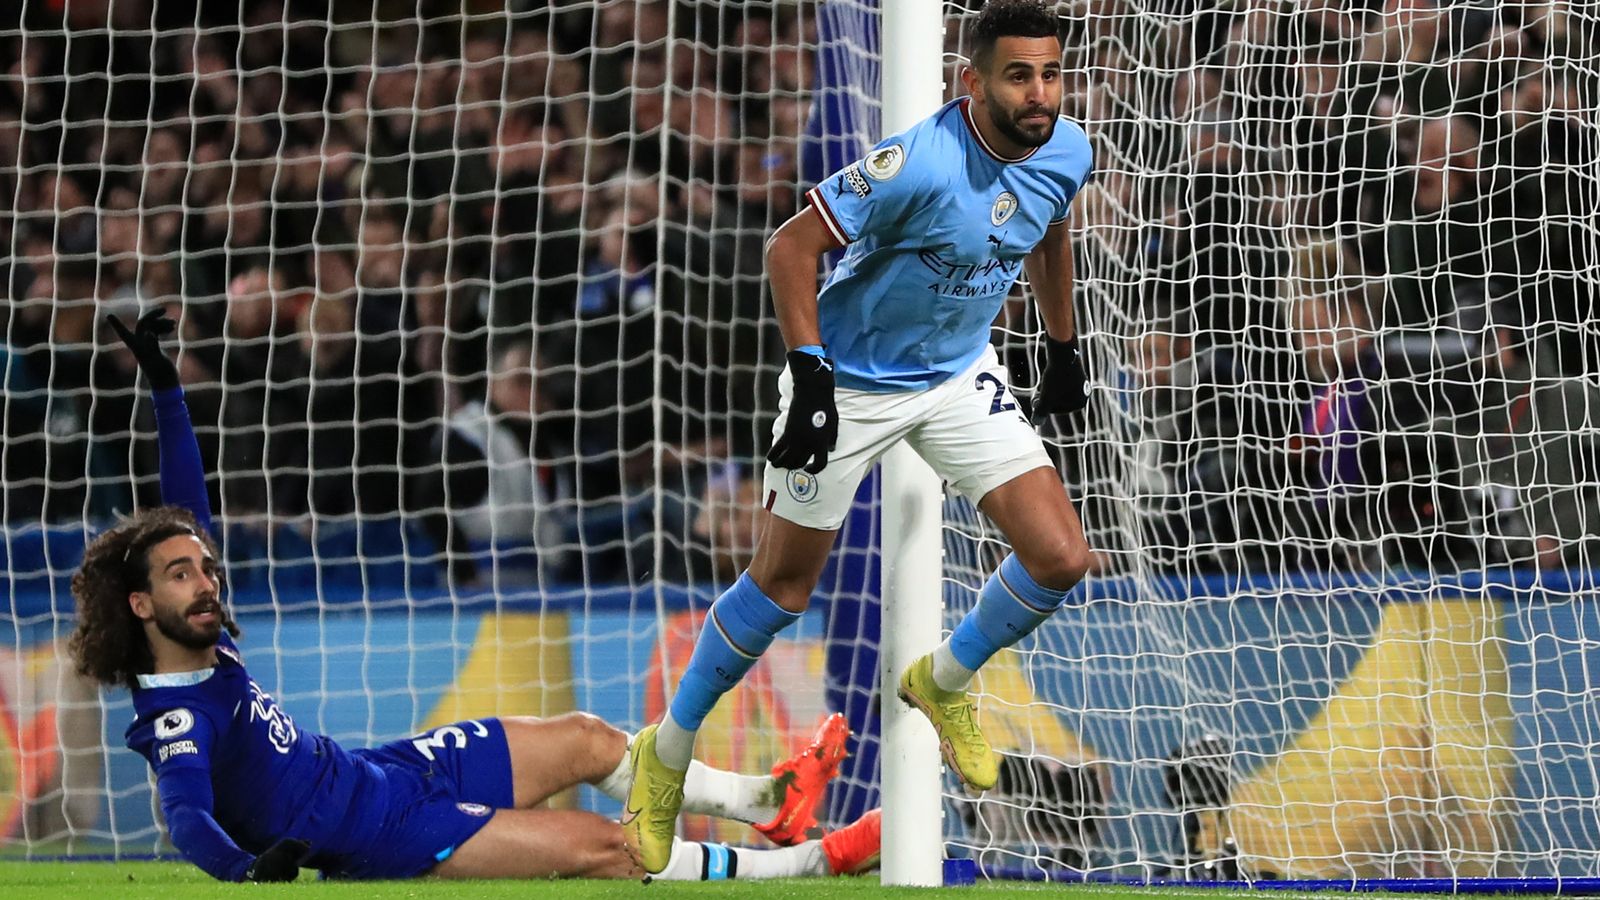 Chelsea’s Marc Cucurella didn’t want to defend, says Jamie Carragher following his role in Manchester City winner